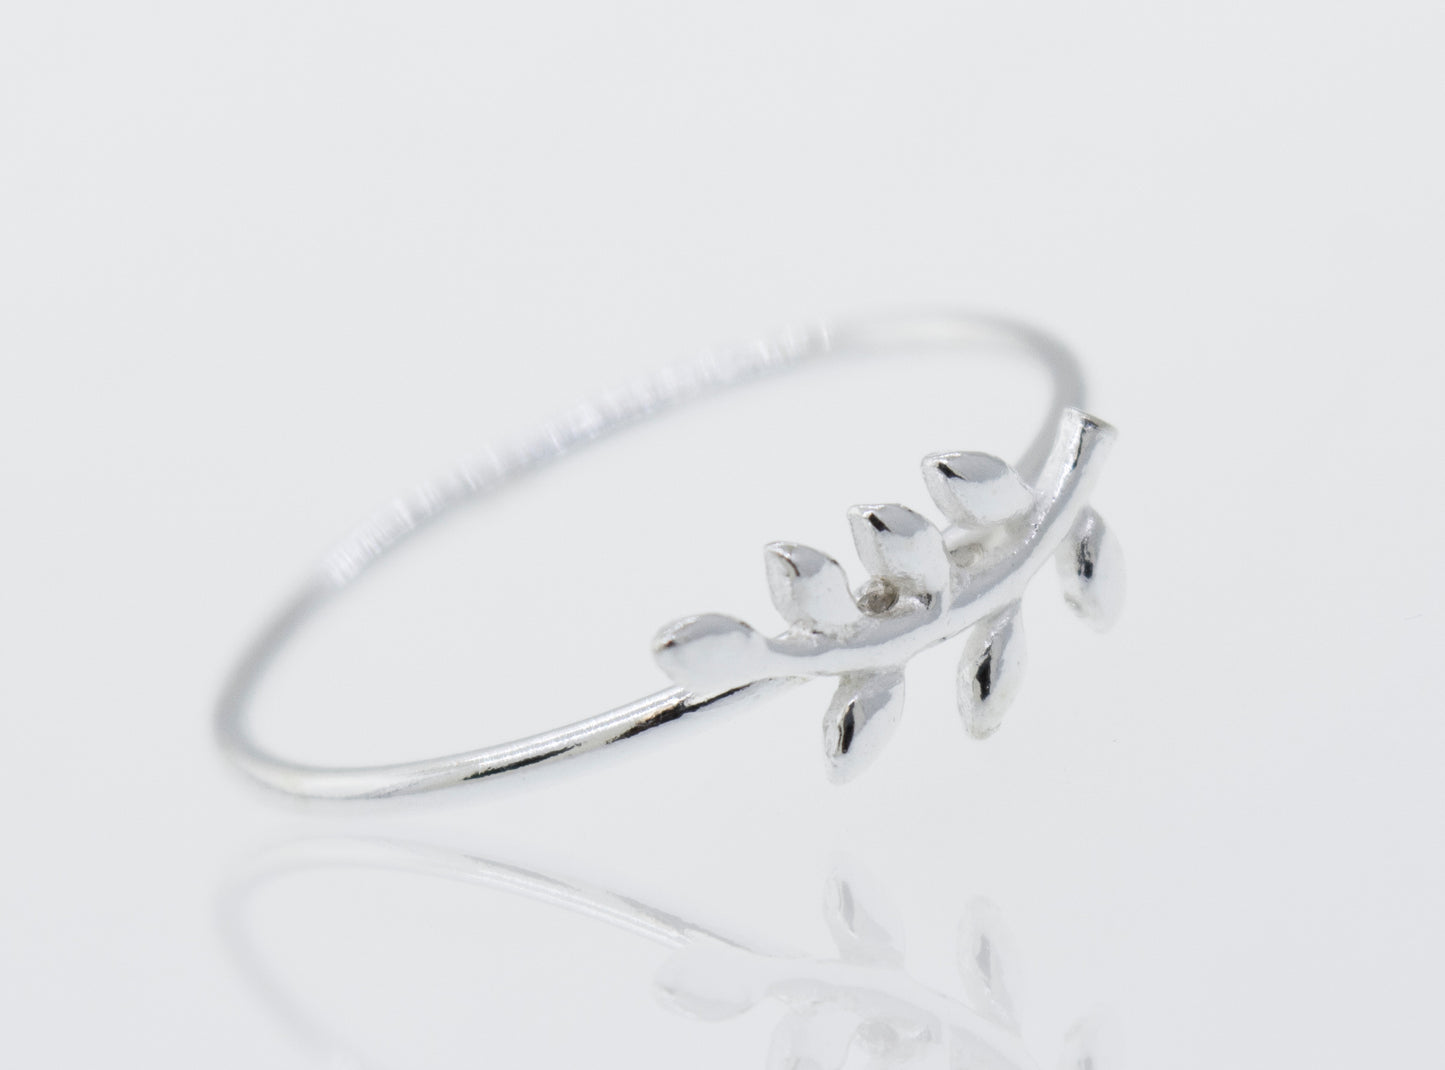 A delicate Little fern Silver Ring with a fern design from Super Silver.